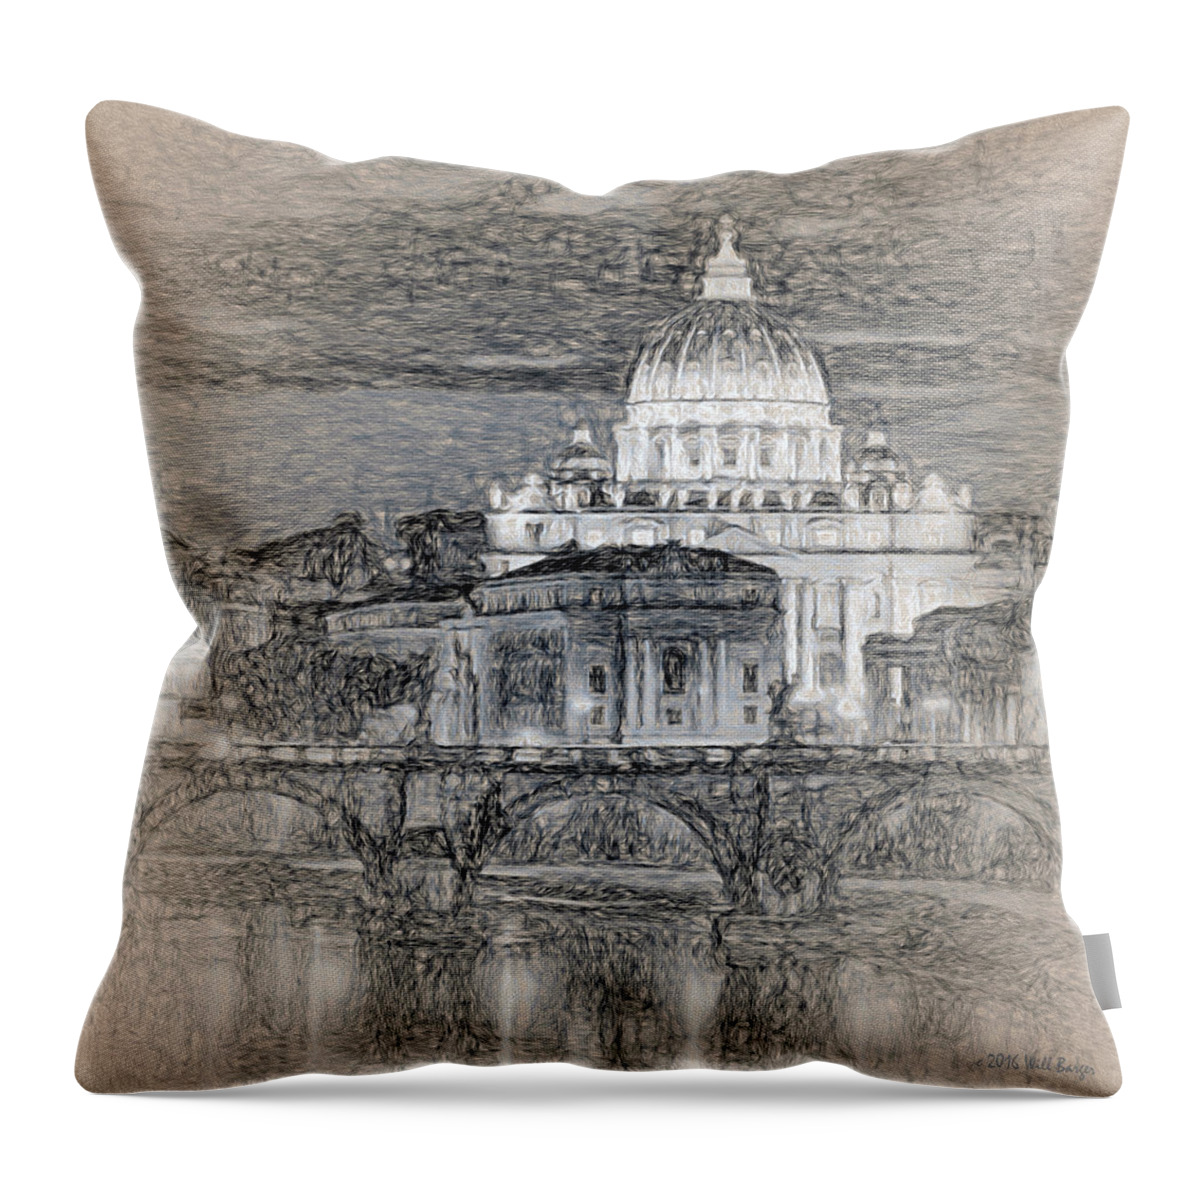 Catholic Throw Pillow featuring the painting St. Peter's Basilica Nbr 2 by Will Barger